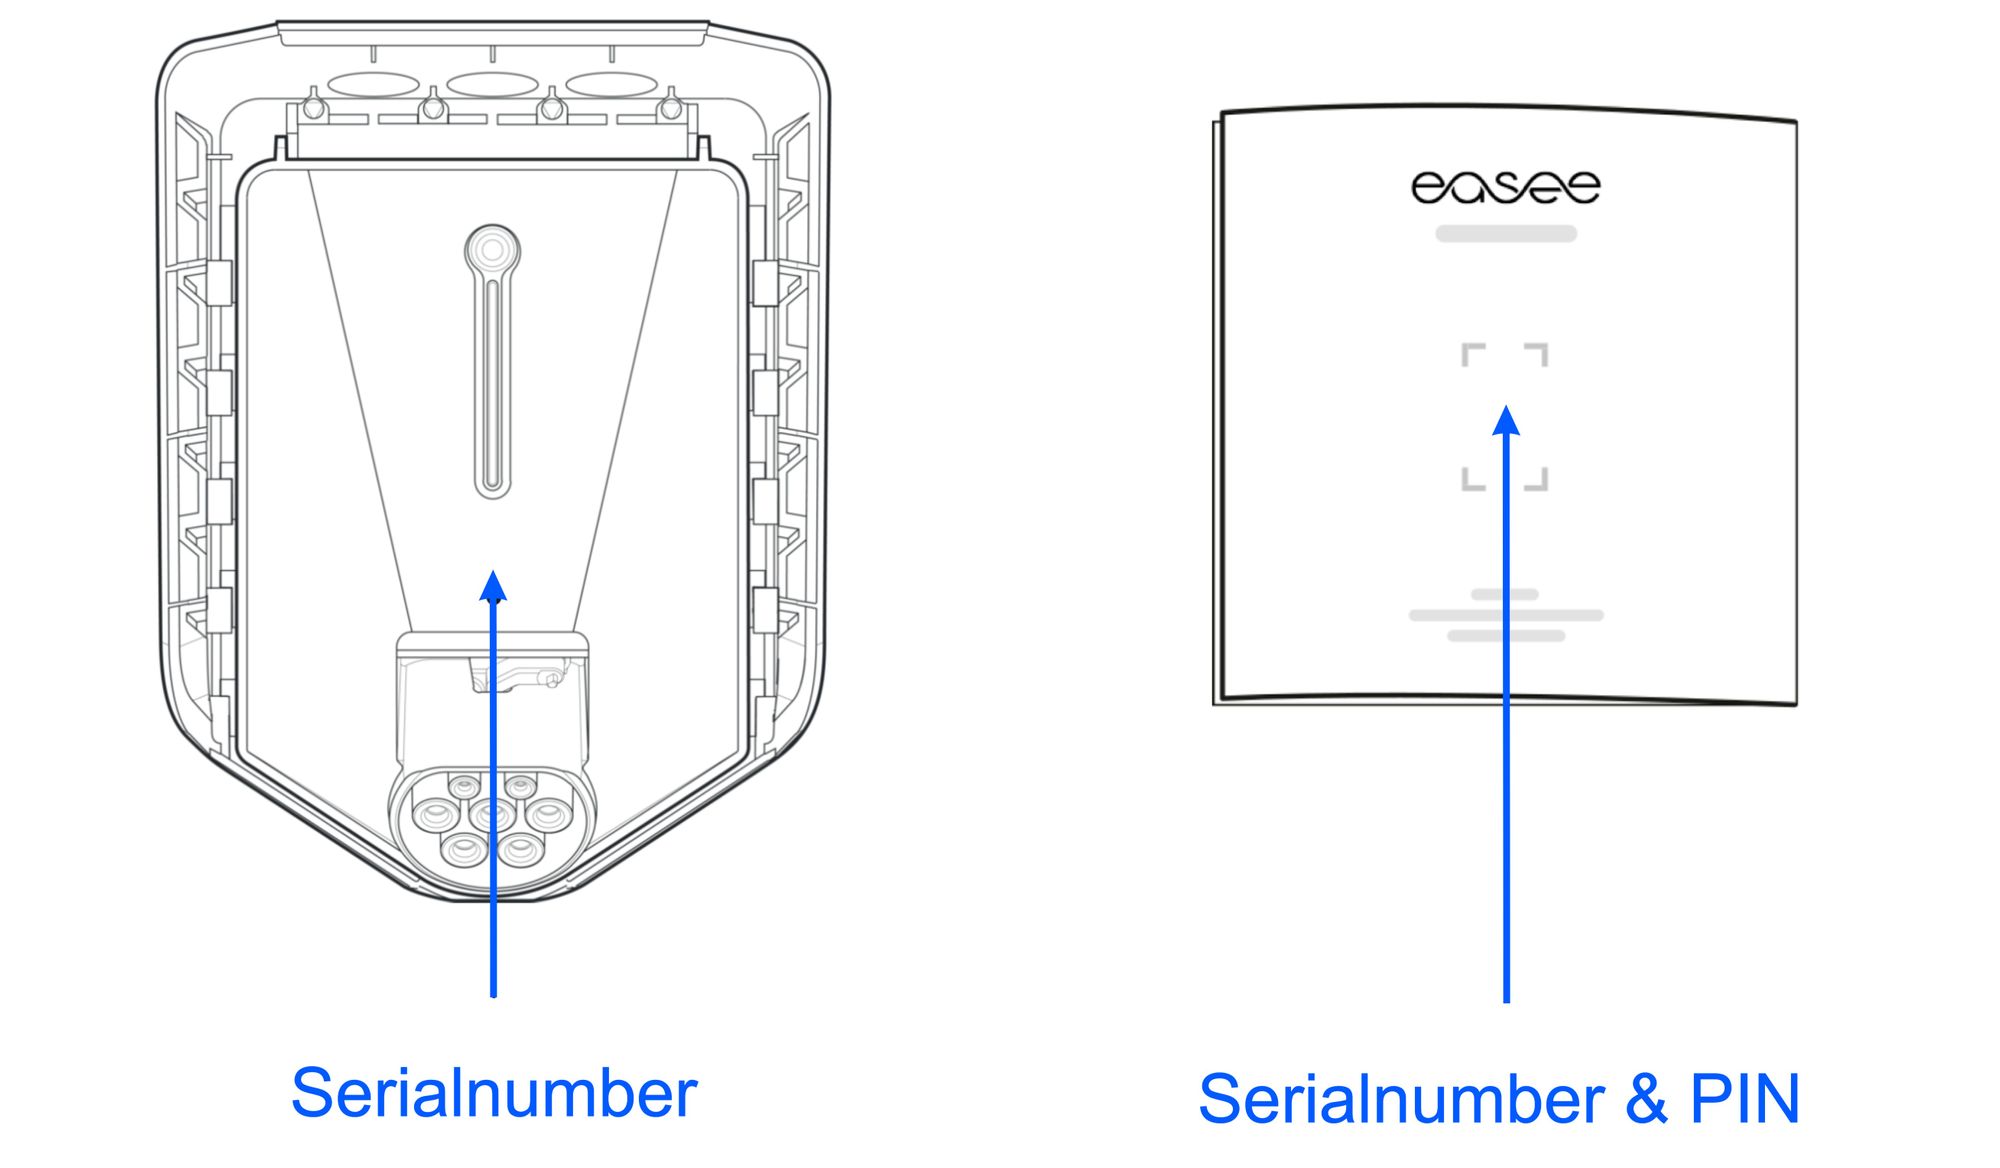 wireframe illustrations of both the chargeberry on a backplate and a bare backplate. In each case the serial number is called out with an arrow.